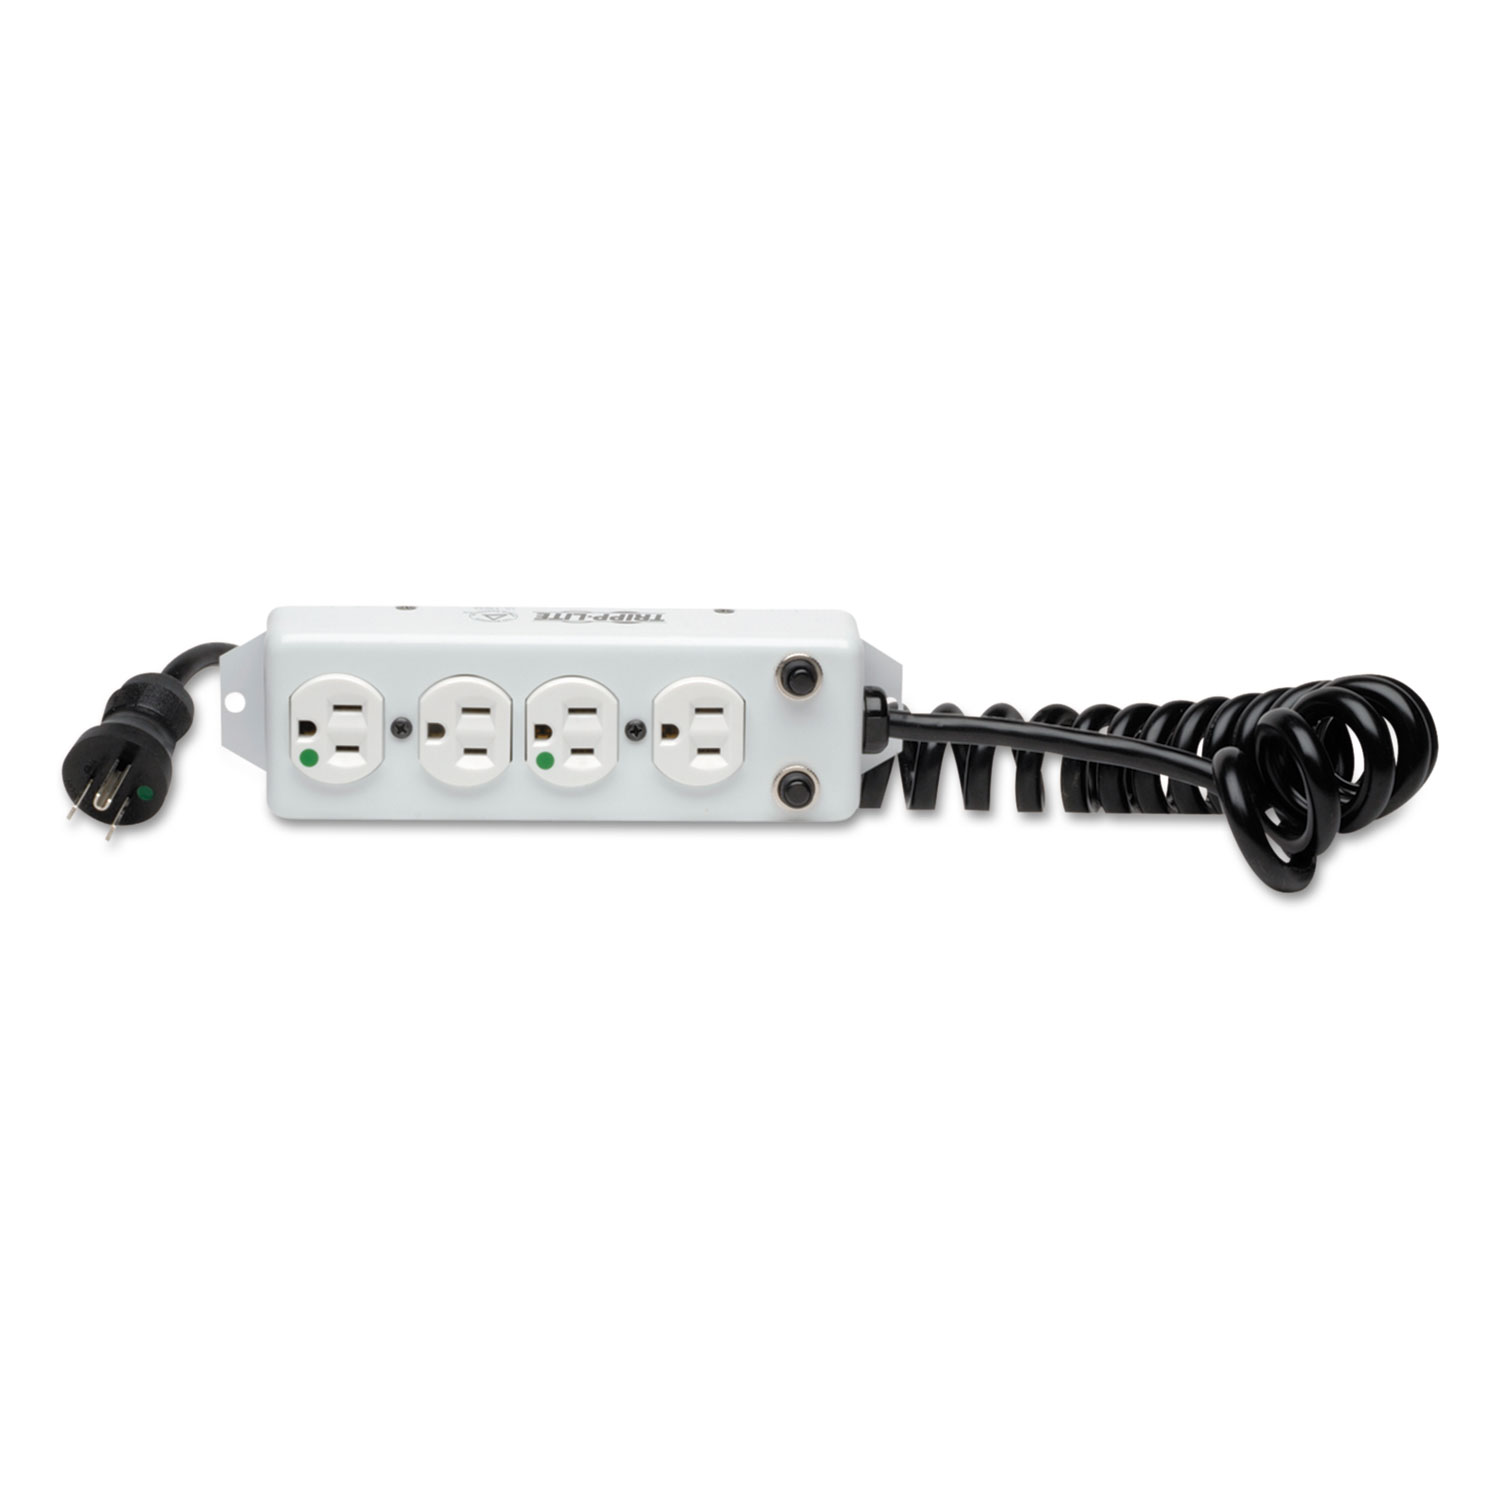 Medical-Grade Power Strip for Patient Care Areas, 4 Outlets, 10 ft Cord, White